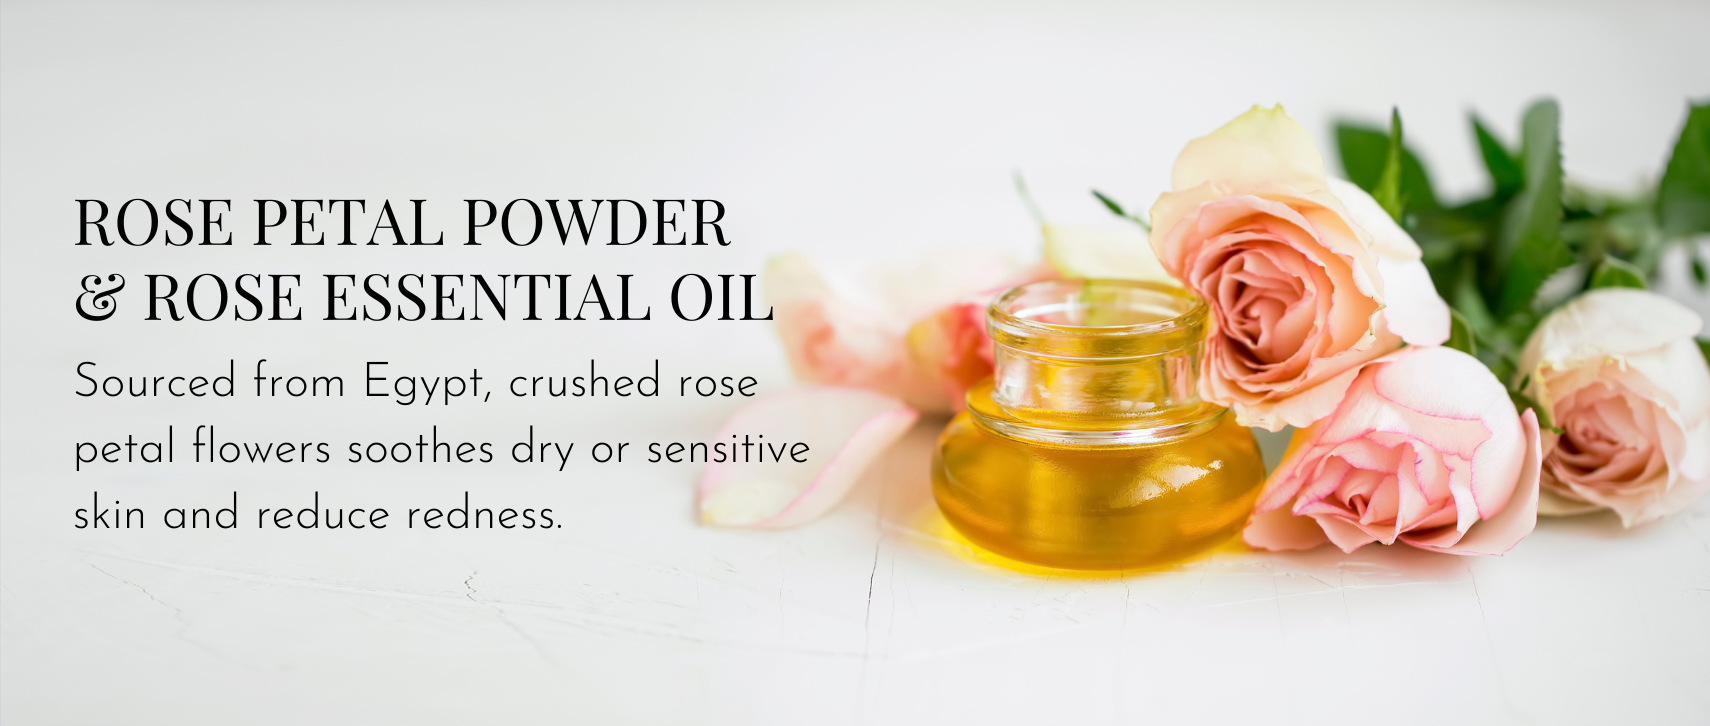 Rose Petal Powder & Rose Essential Oil – Sourced from Egypt, crushed rose petal flowers soothes dry or sensitive skin and reduce redness.